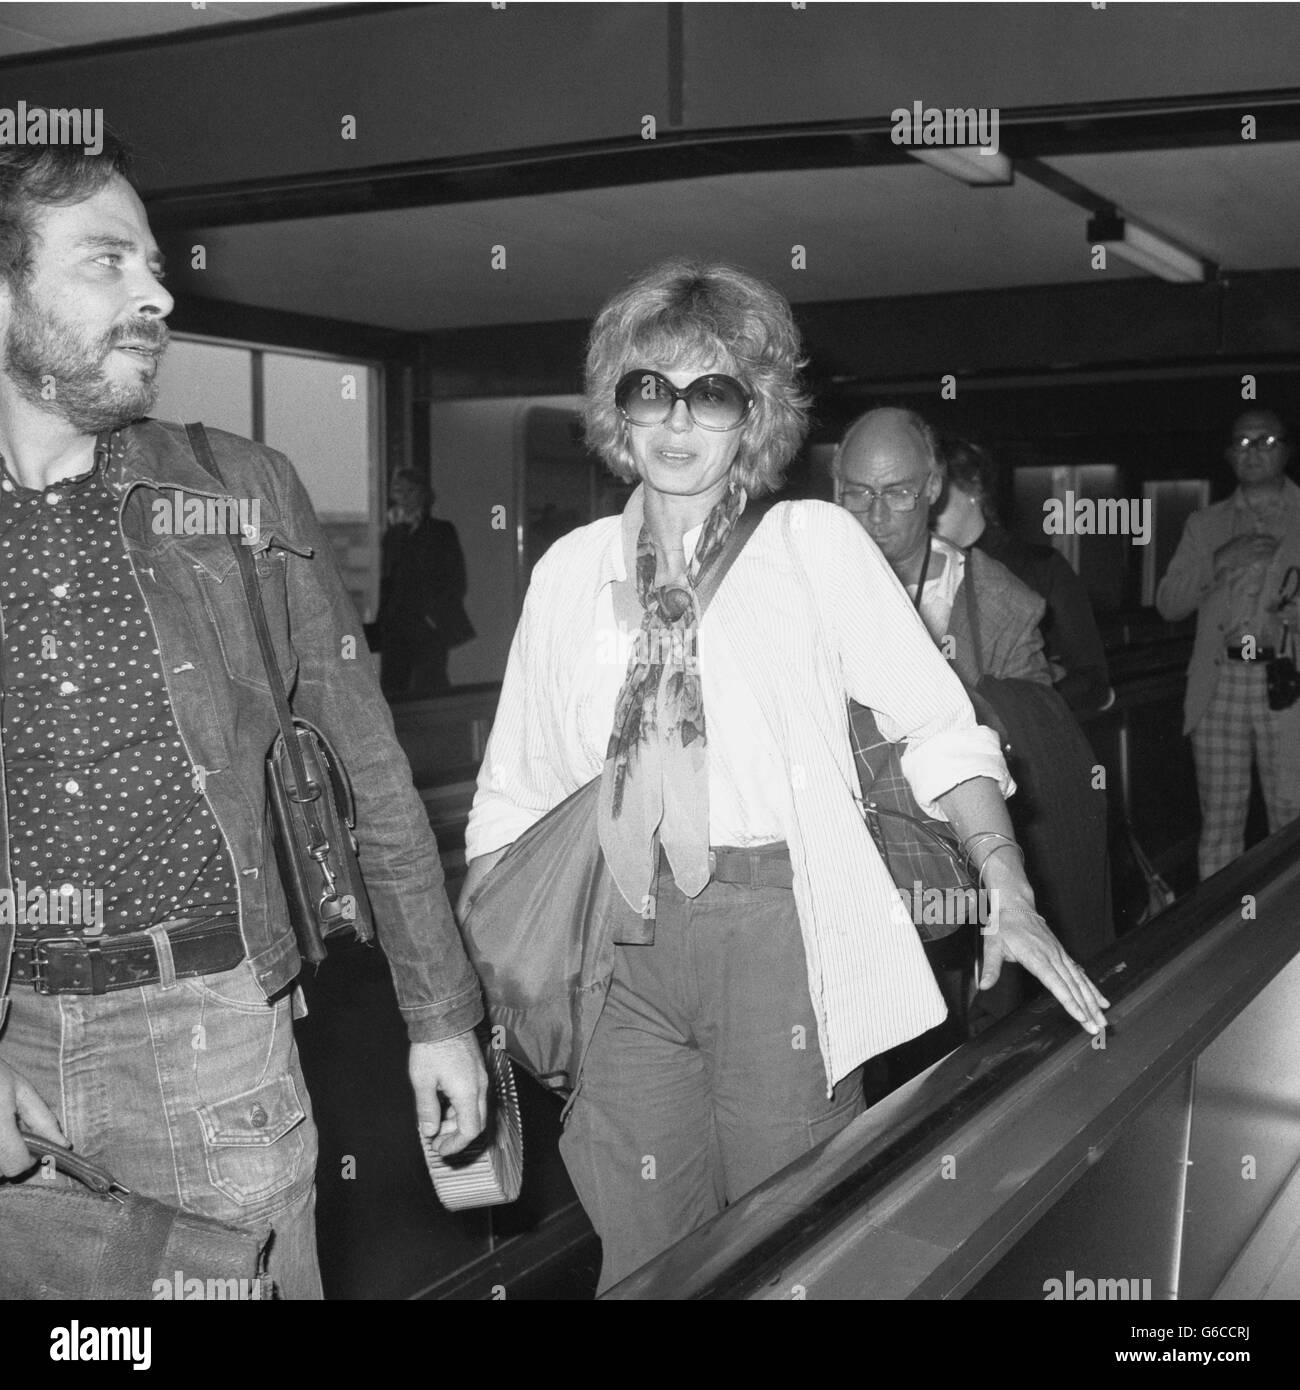 New Avengers star Joanna Lumley at London's Heathrow Airport before flying to Canada. Archive-pa181258-1 Stock Photo